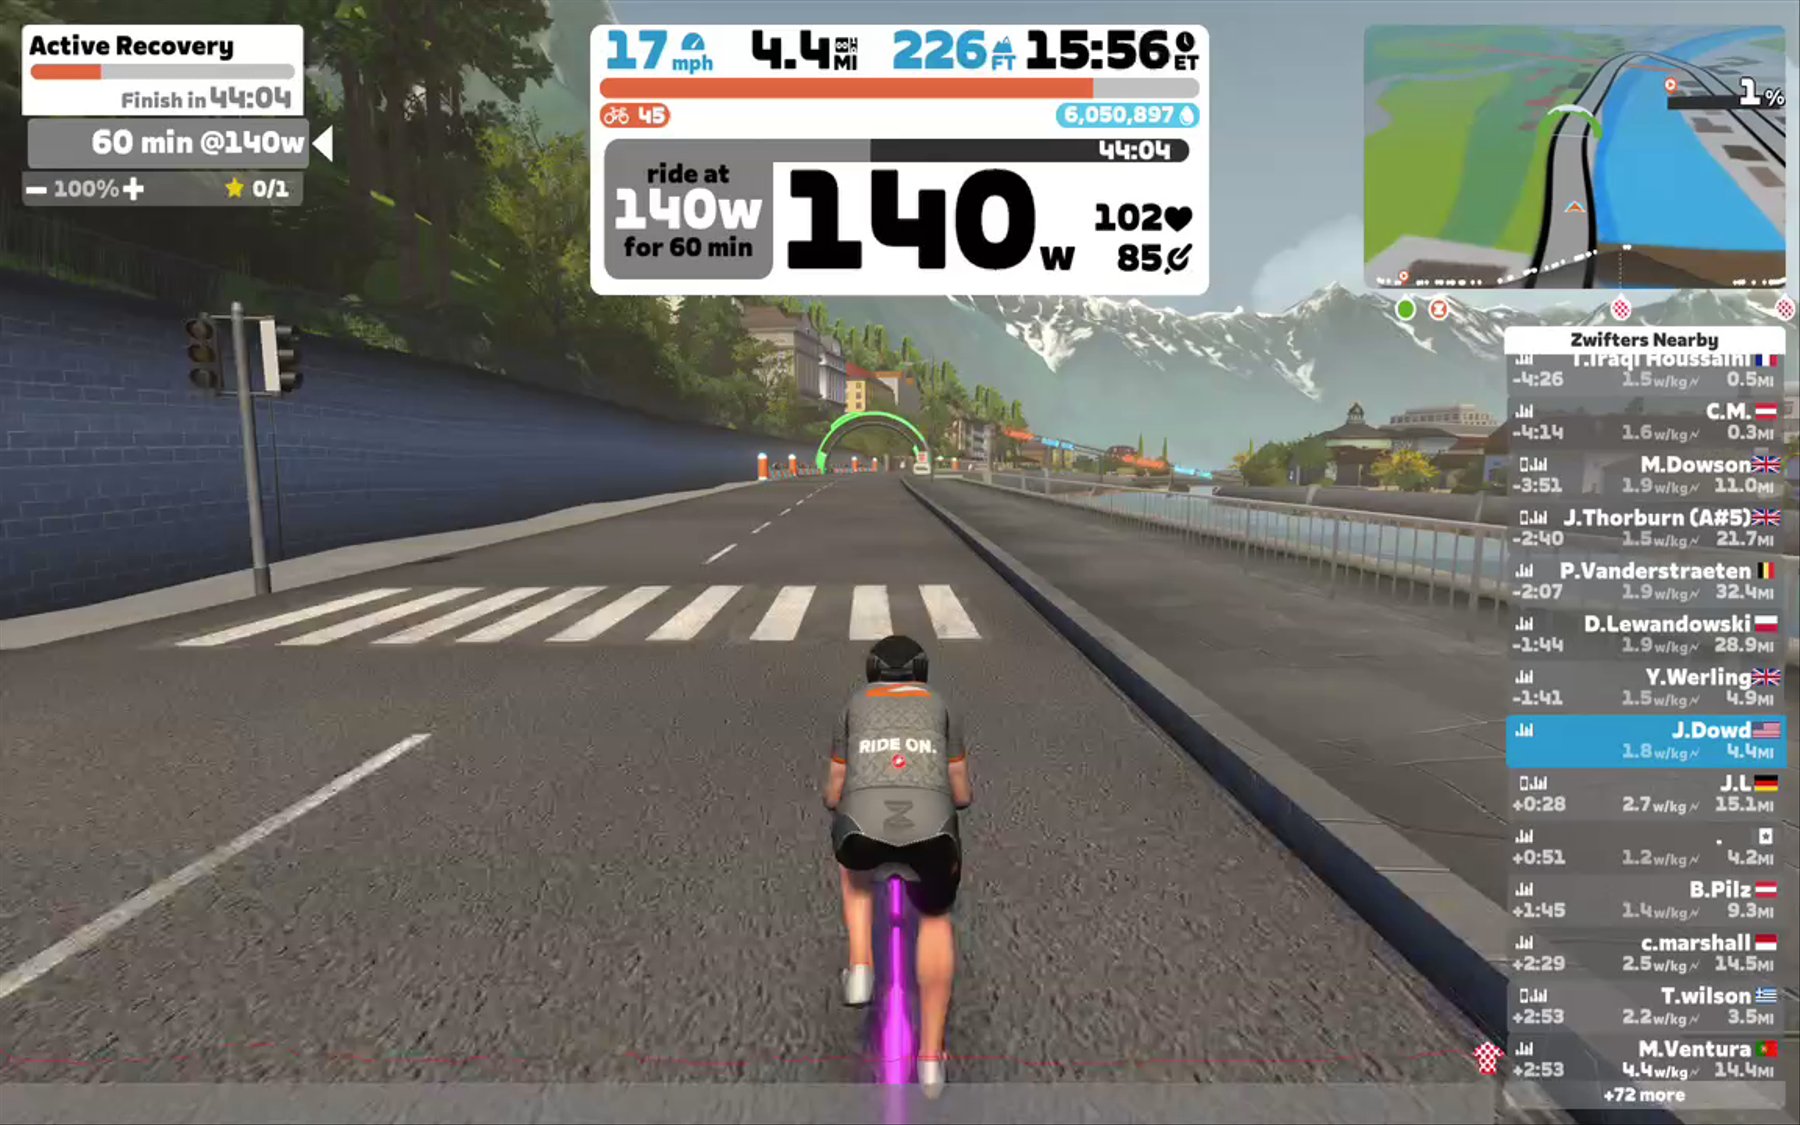 Zwift - Active Recovery in Innsbruck